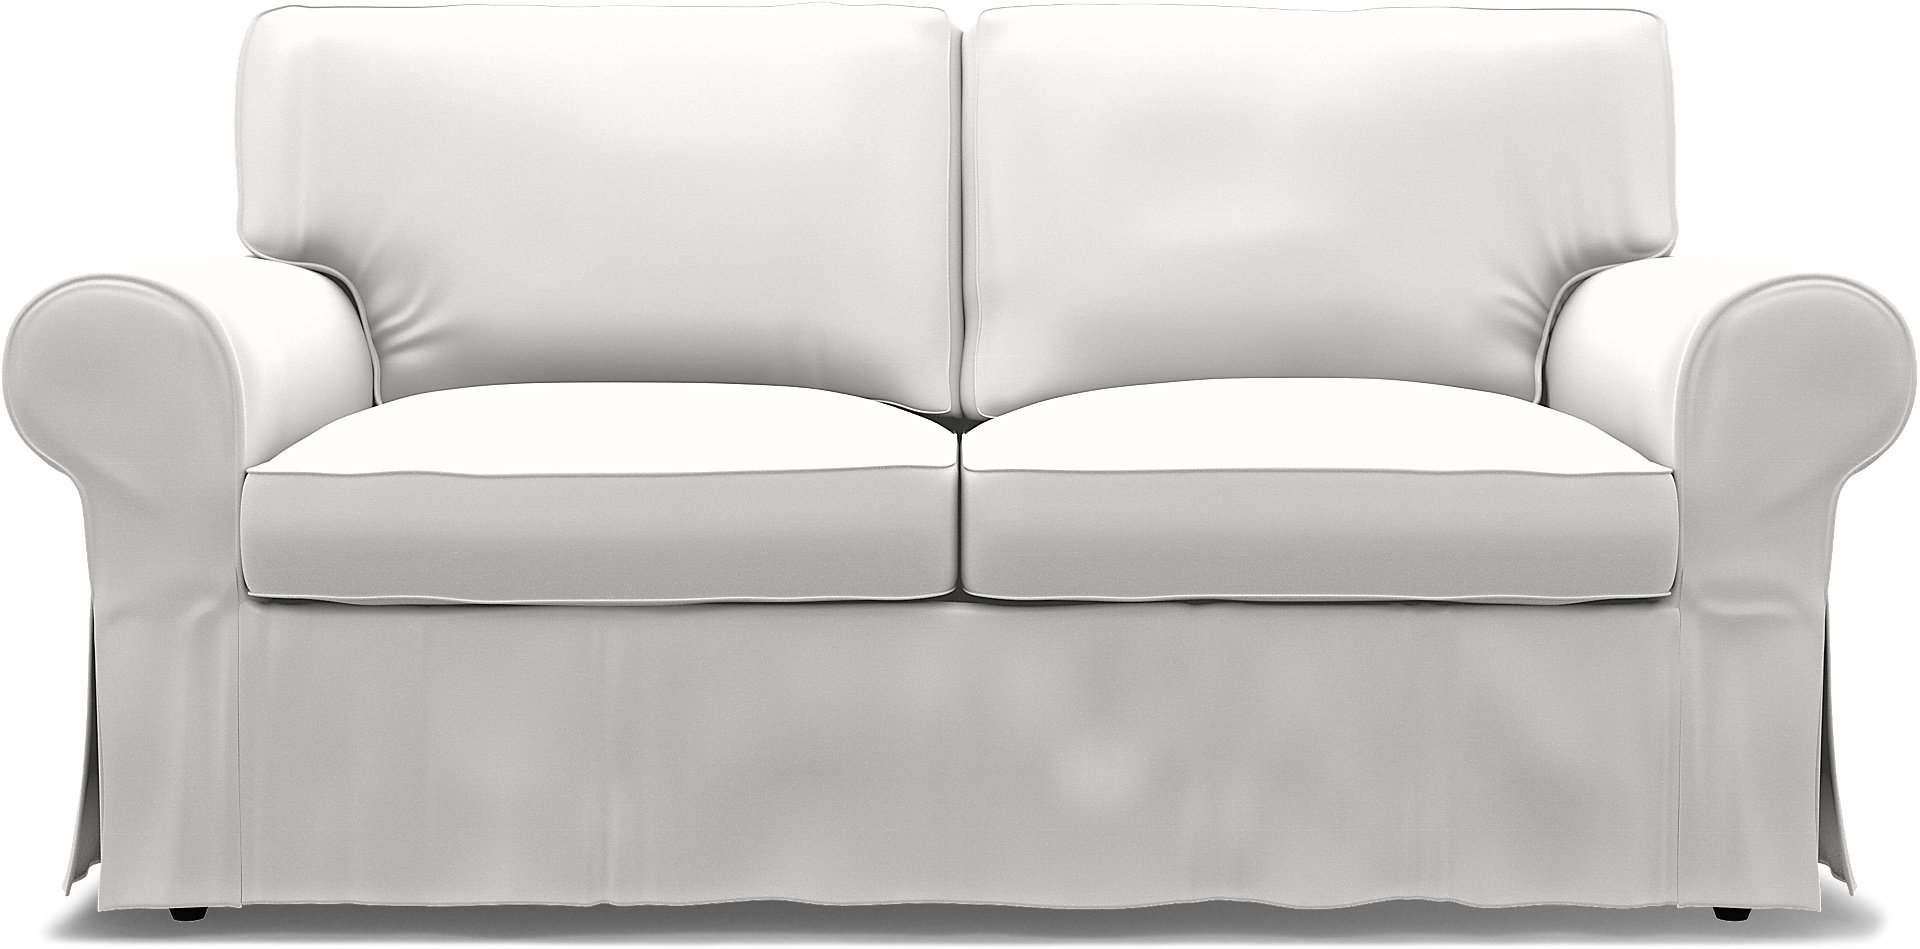 IKEA - Ektorp 2 Seater Sofa Bed Cover, Absolute White, Cotton - Bemz